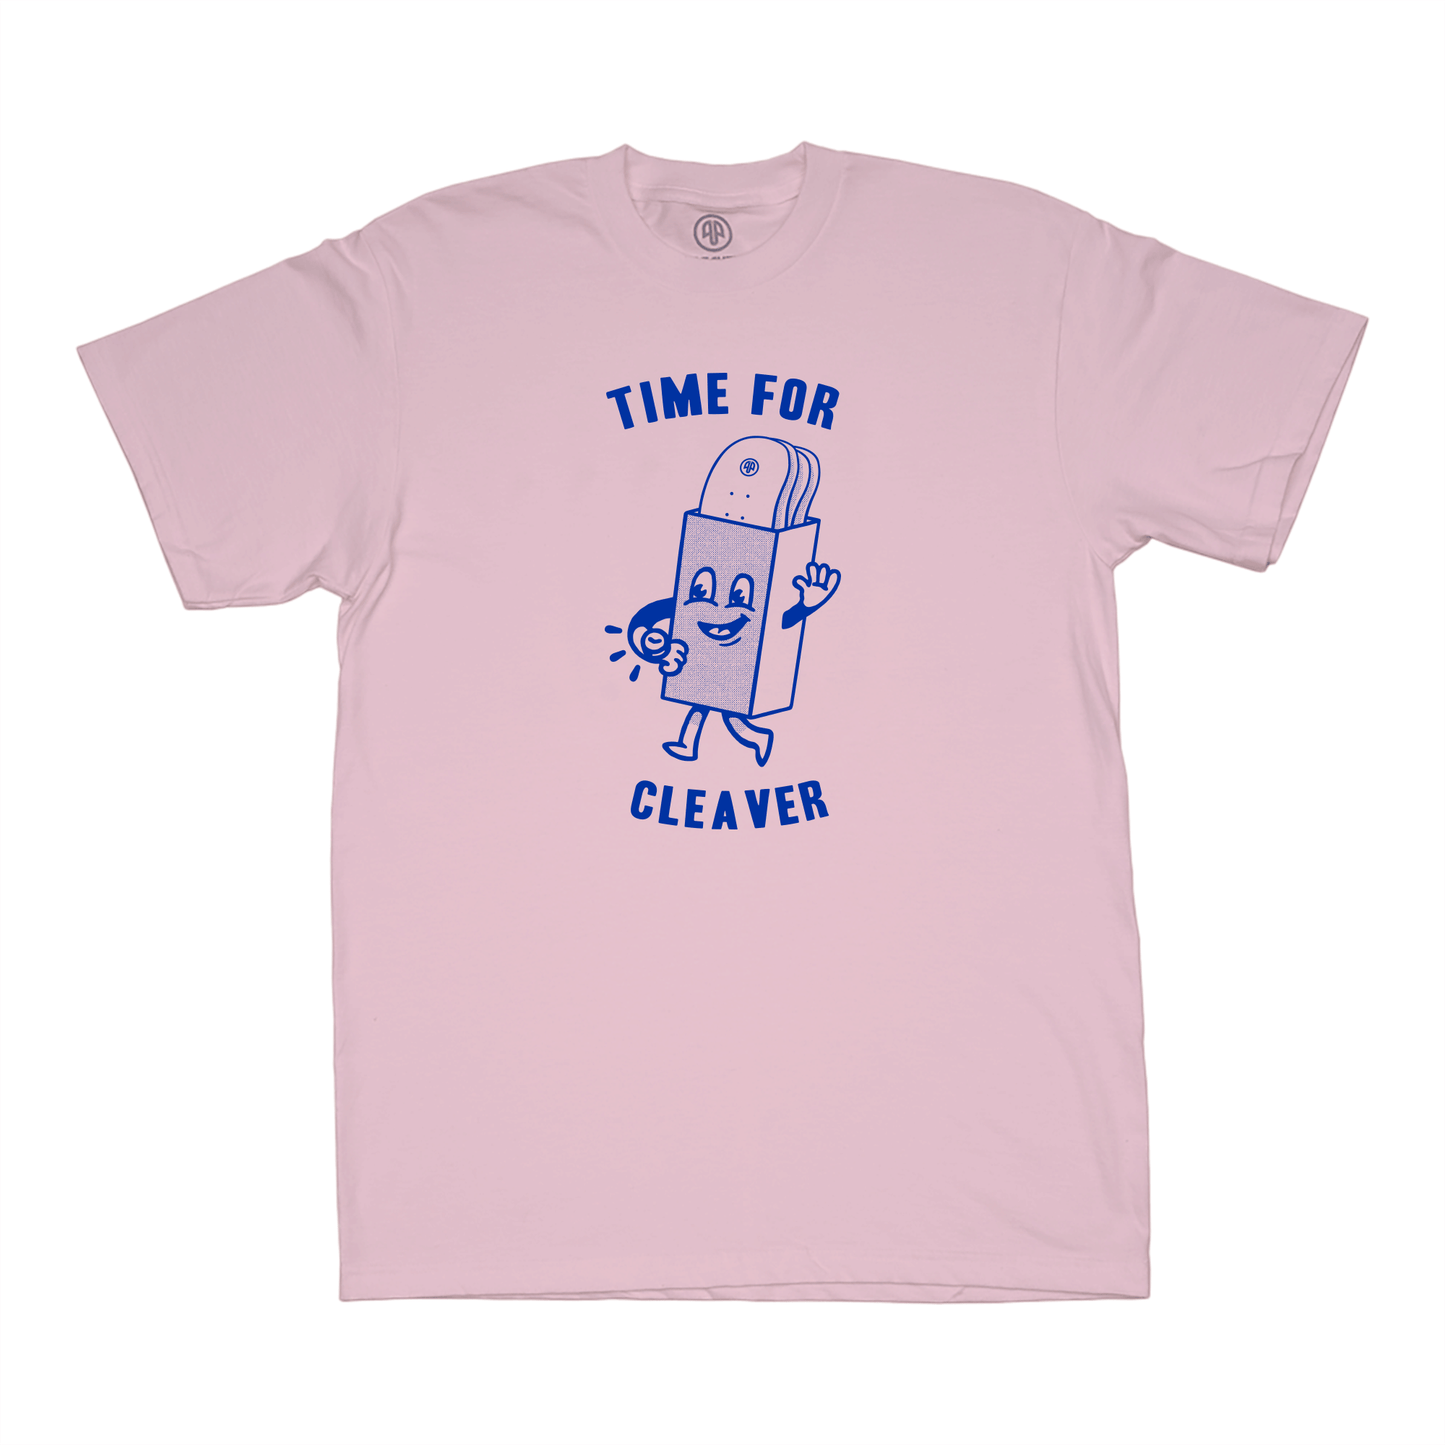 "TIME FOR" TEE PINK